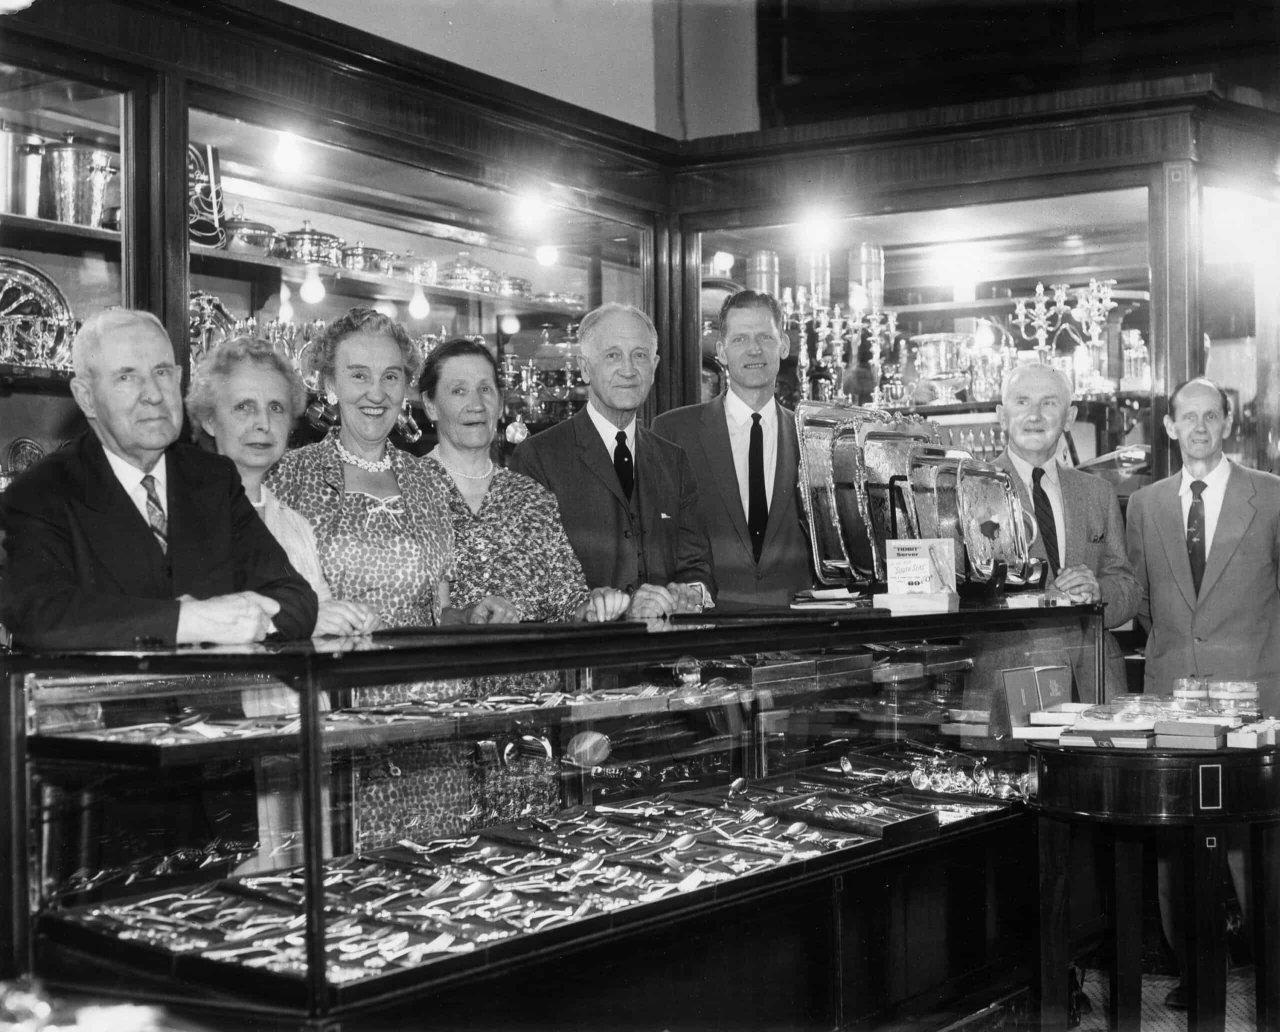 O.B. Allan staff photograph at 470 Granville St, c 1960s. Source: City of Vancouver Archives 1385-16